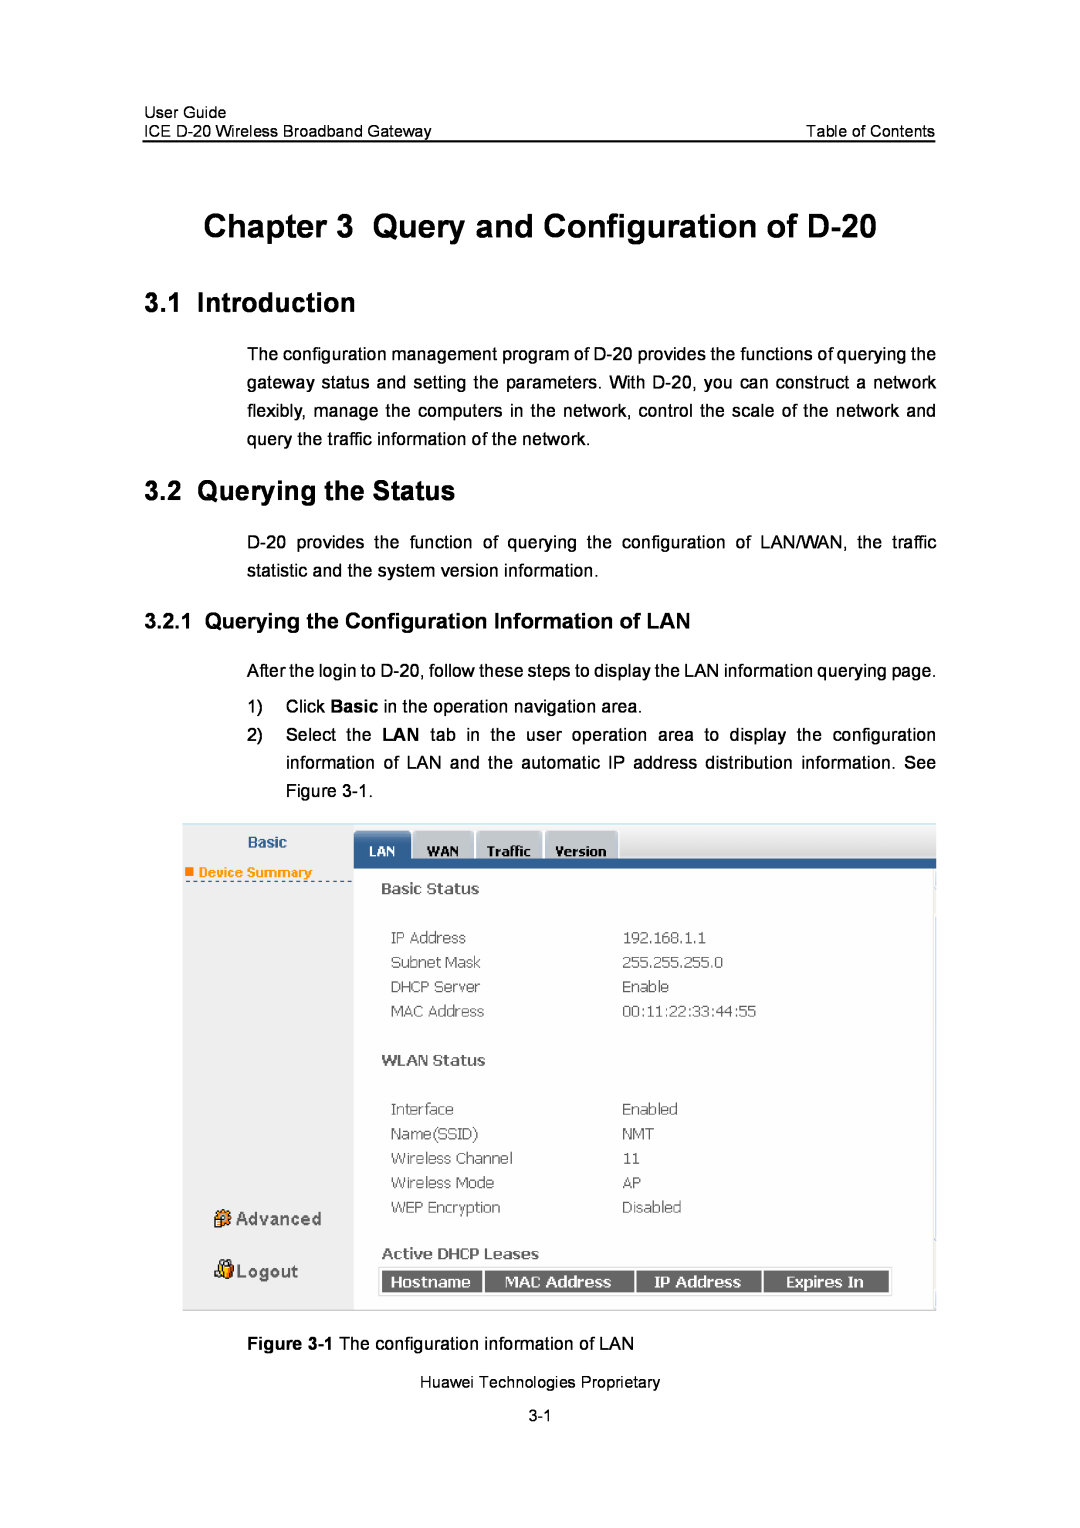 Insignia ICE D-20 EC506 manual Query and Configuration of D-20, Introduction, Querying the Status 